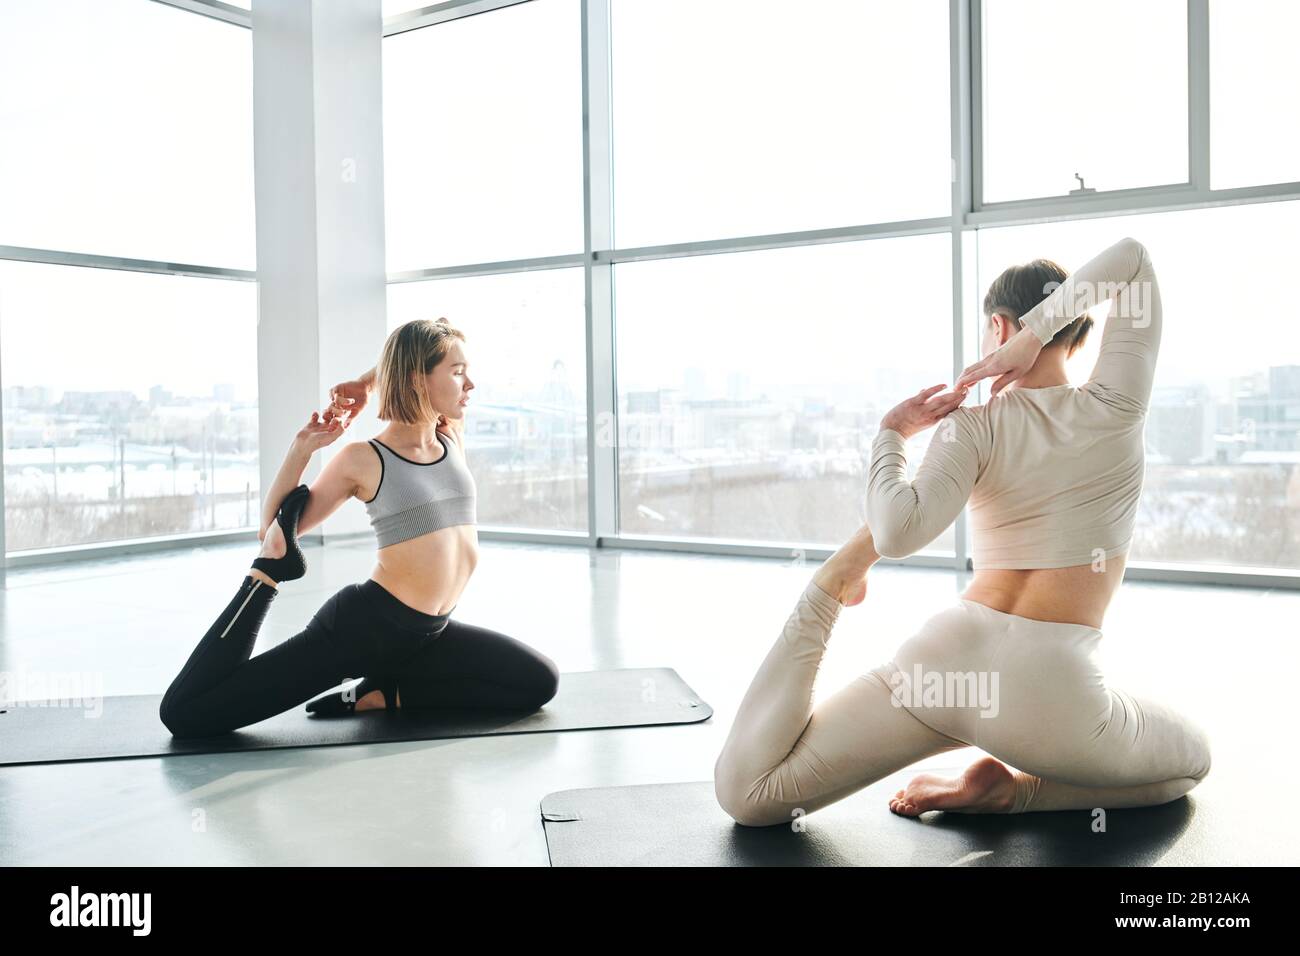 Young active woman repeating yoga exercise after her fitness instructor Stock Photo